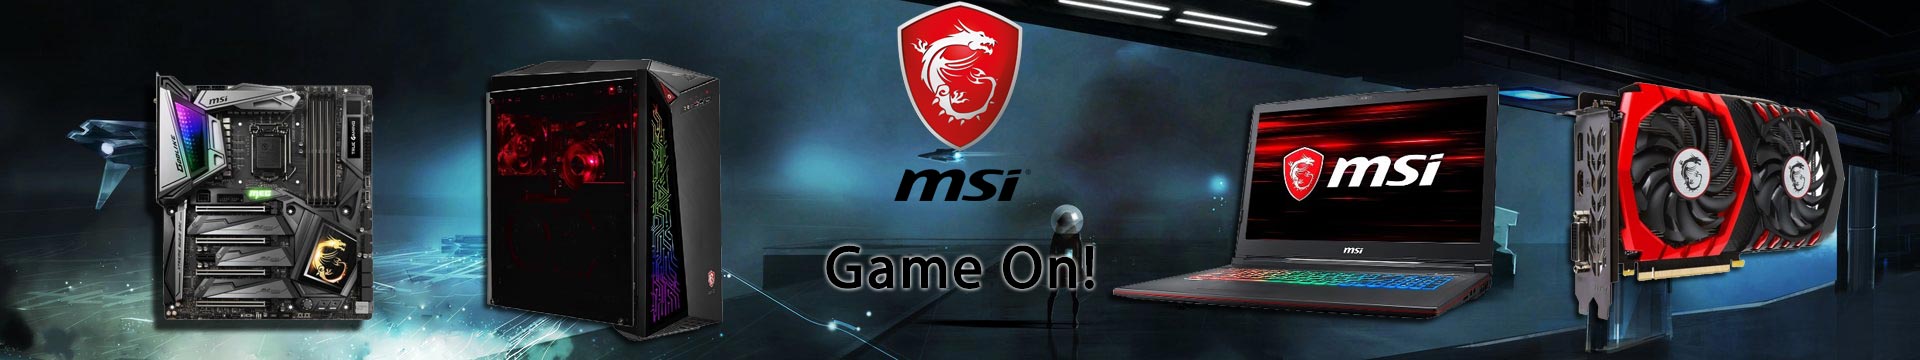 MSI, GAMING, PC, LAPTOP, GRAPHIC CARD, VIDEO CARD